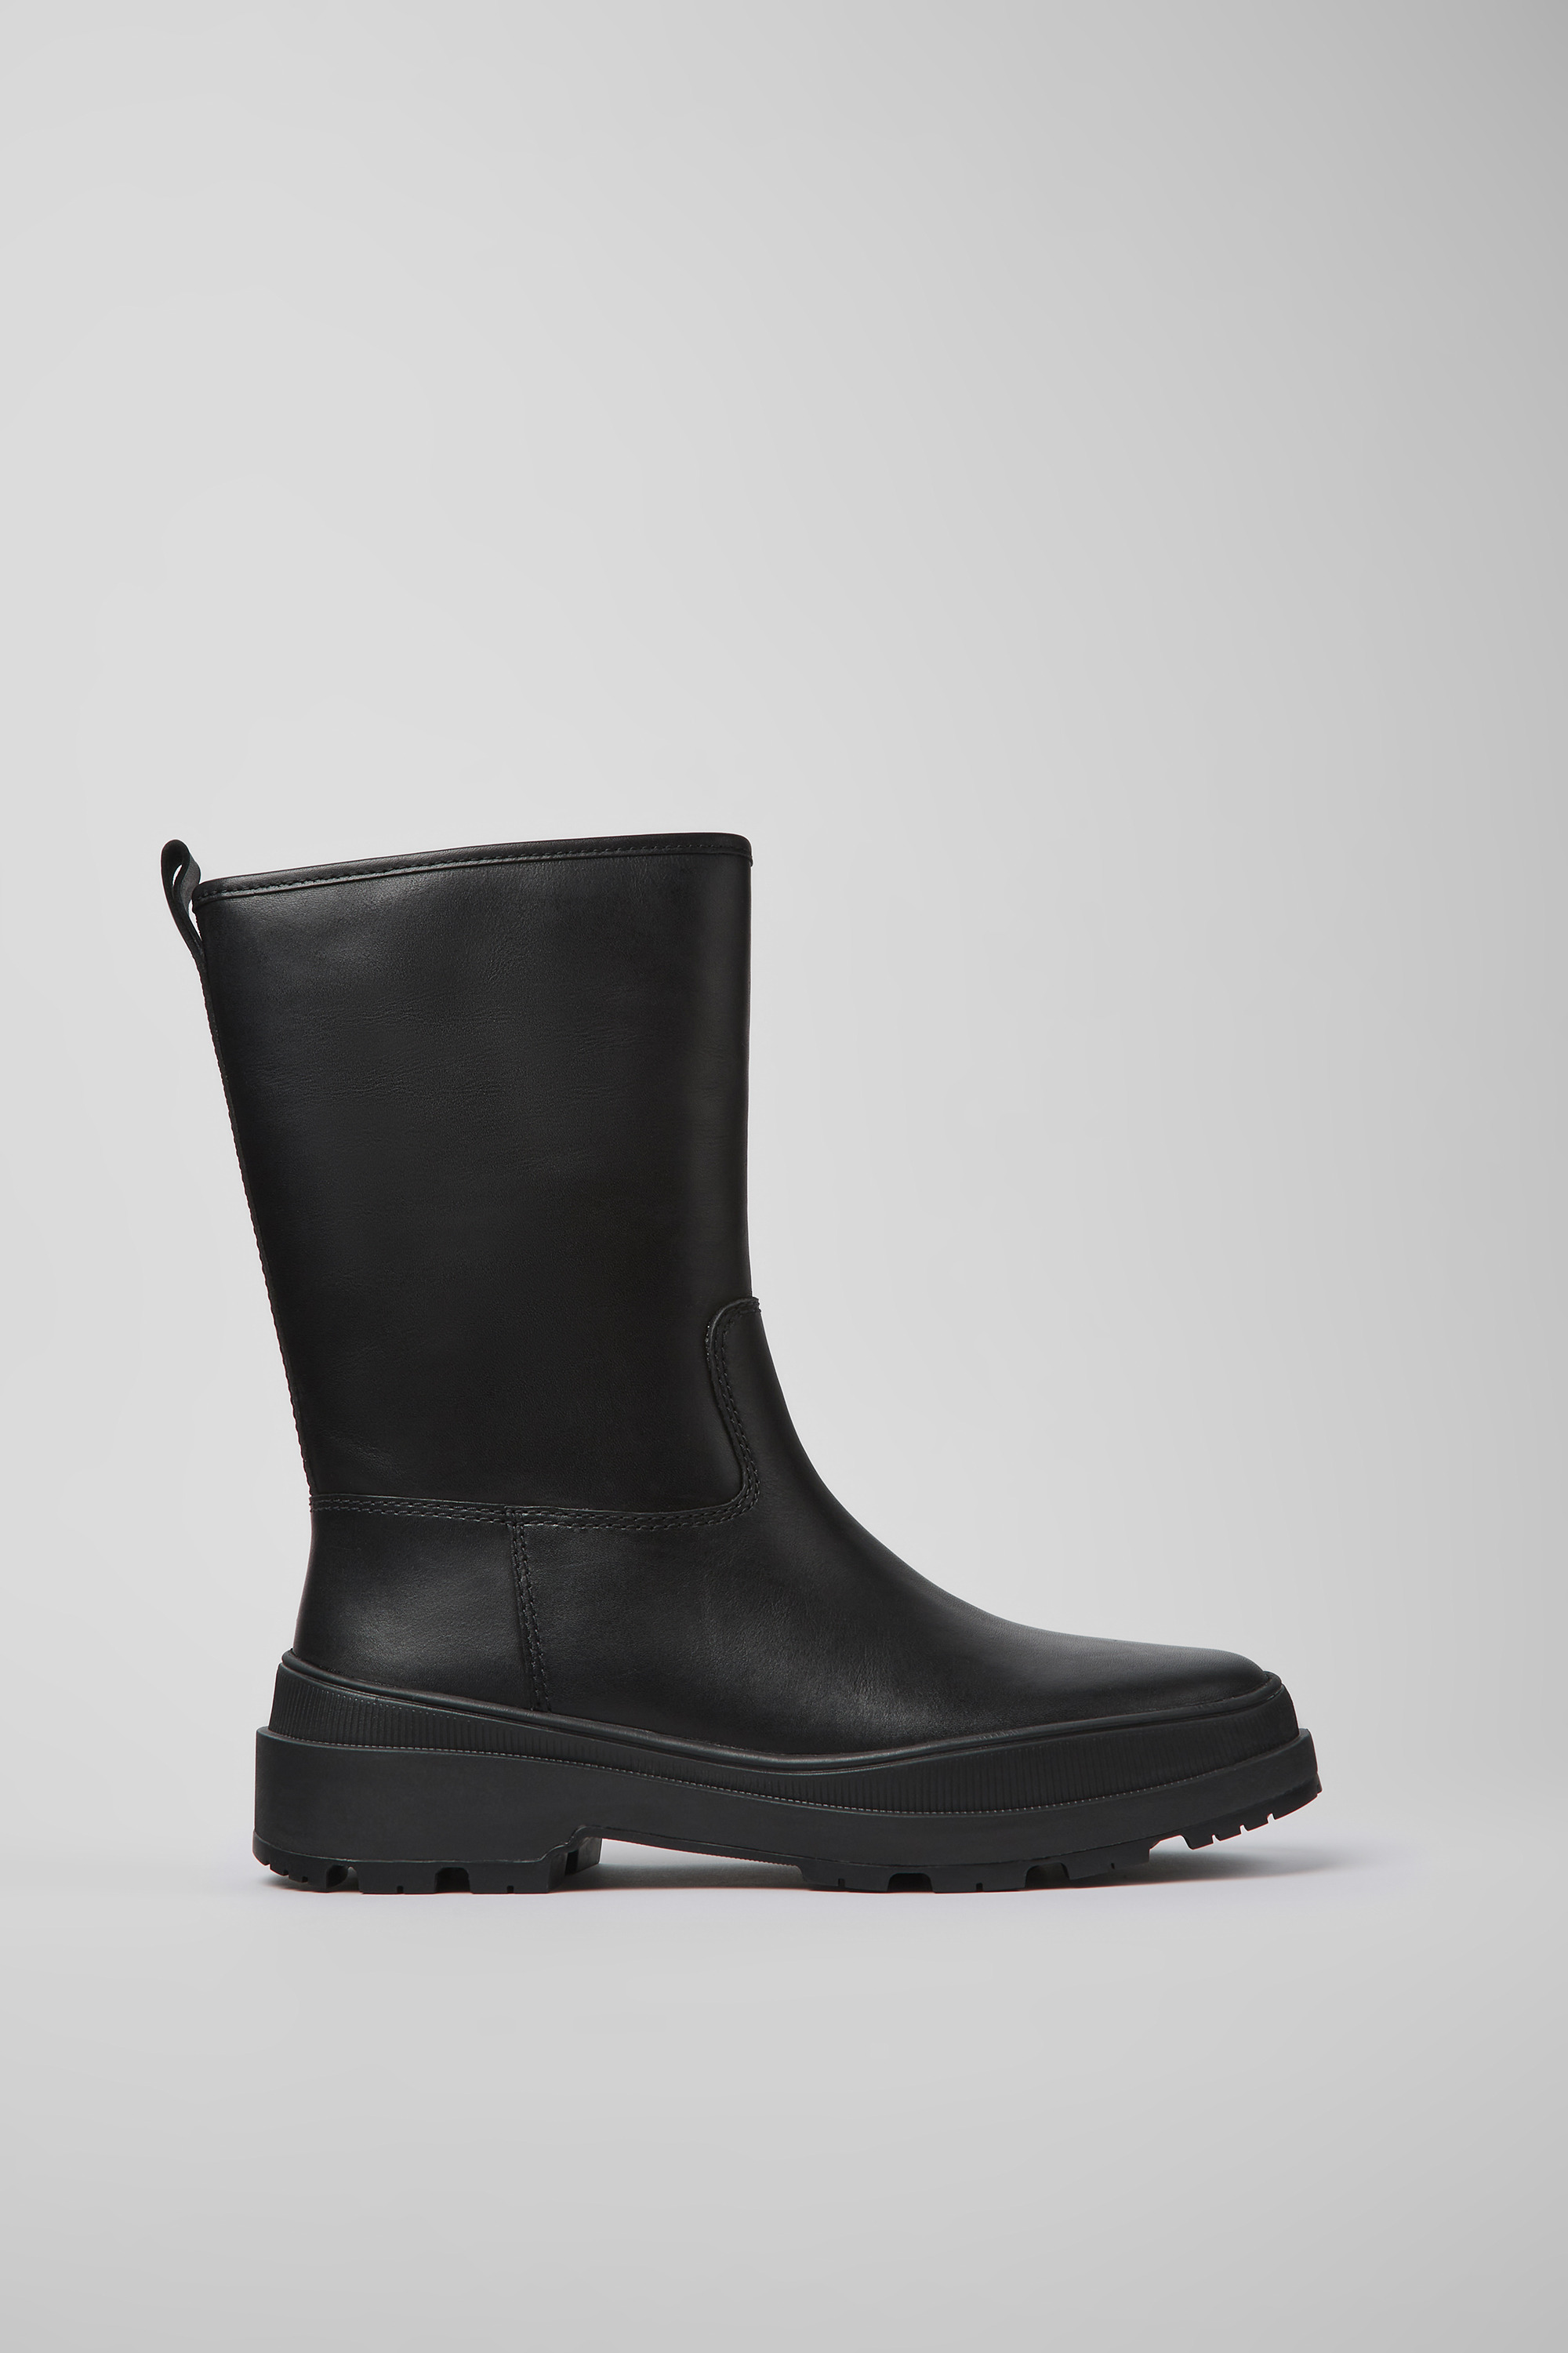 BRUTUS Black Boots for Women - Spring/Summer collection - Camper USA